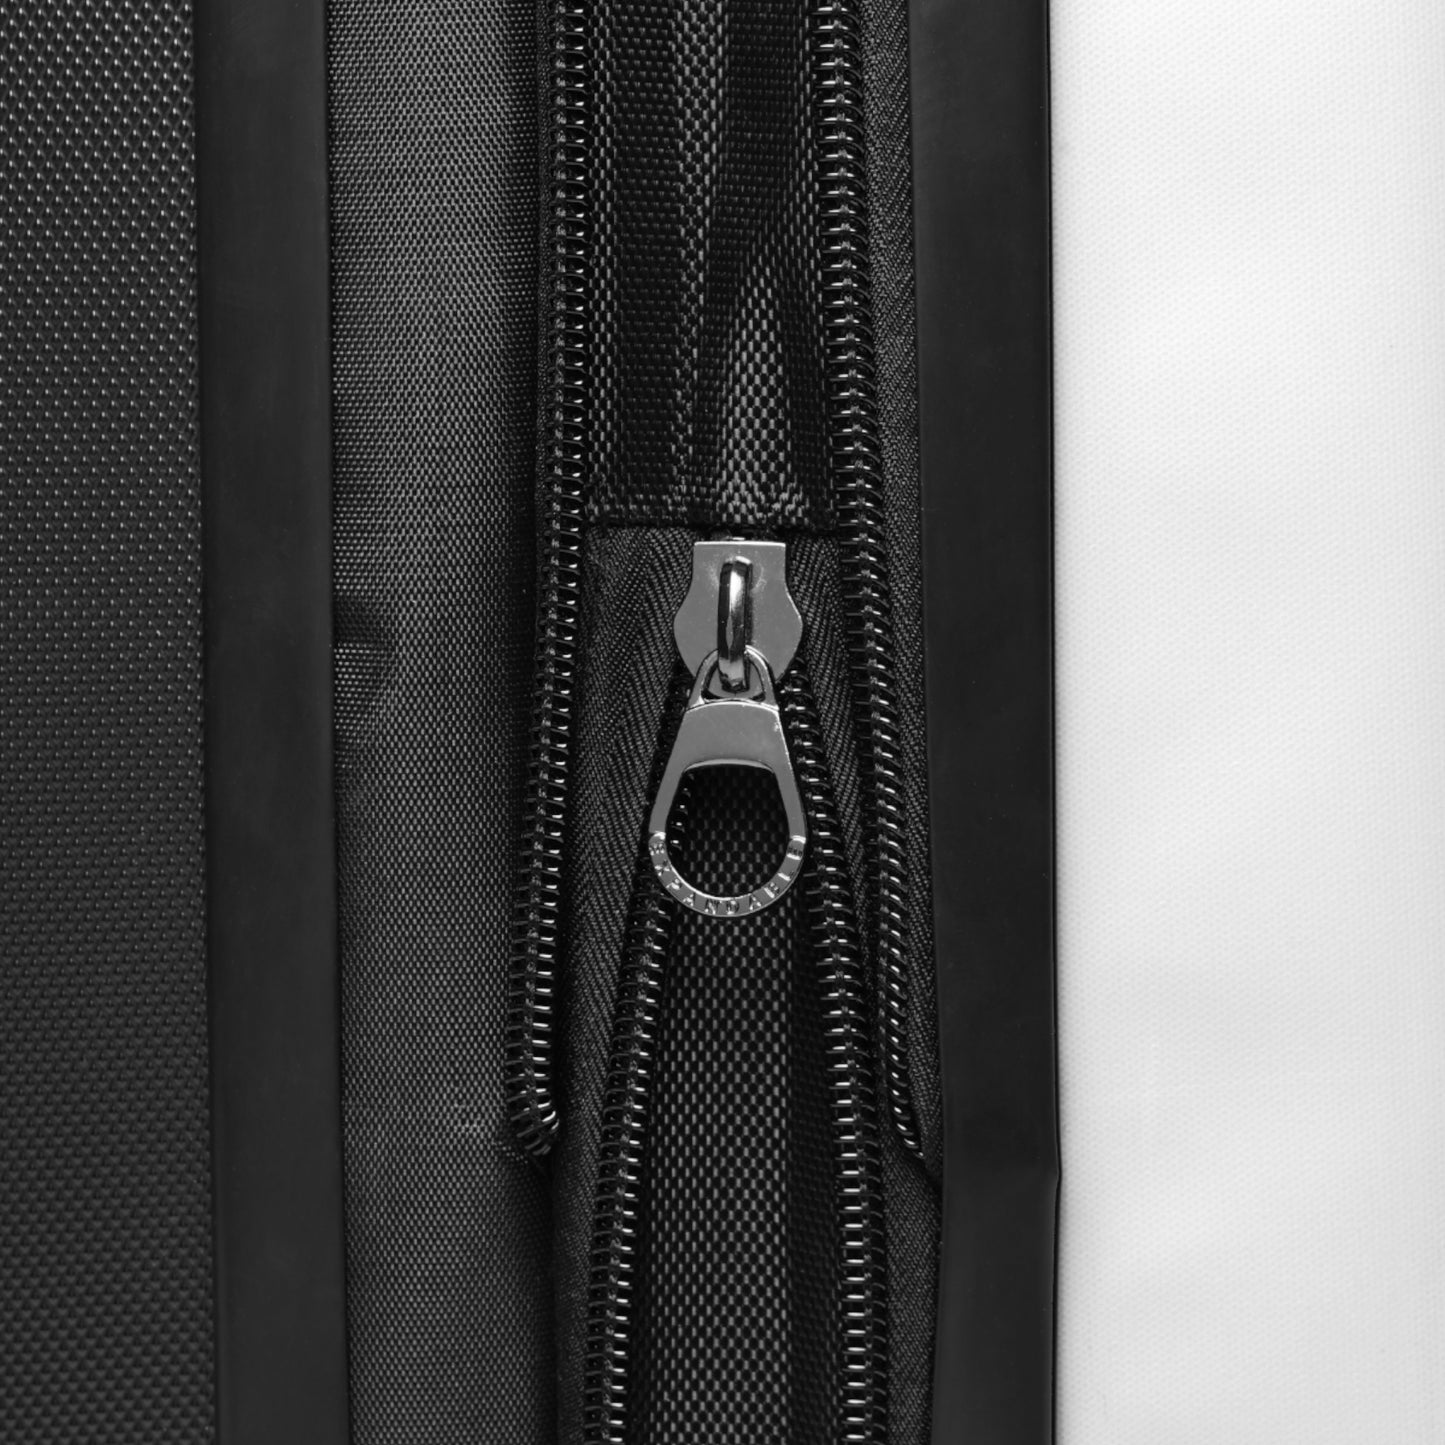 Equestrian Snaffle Bit and Reins Cabin Suitcase